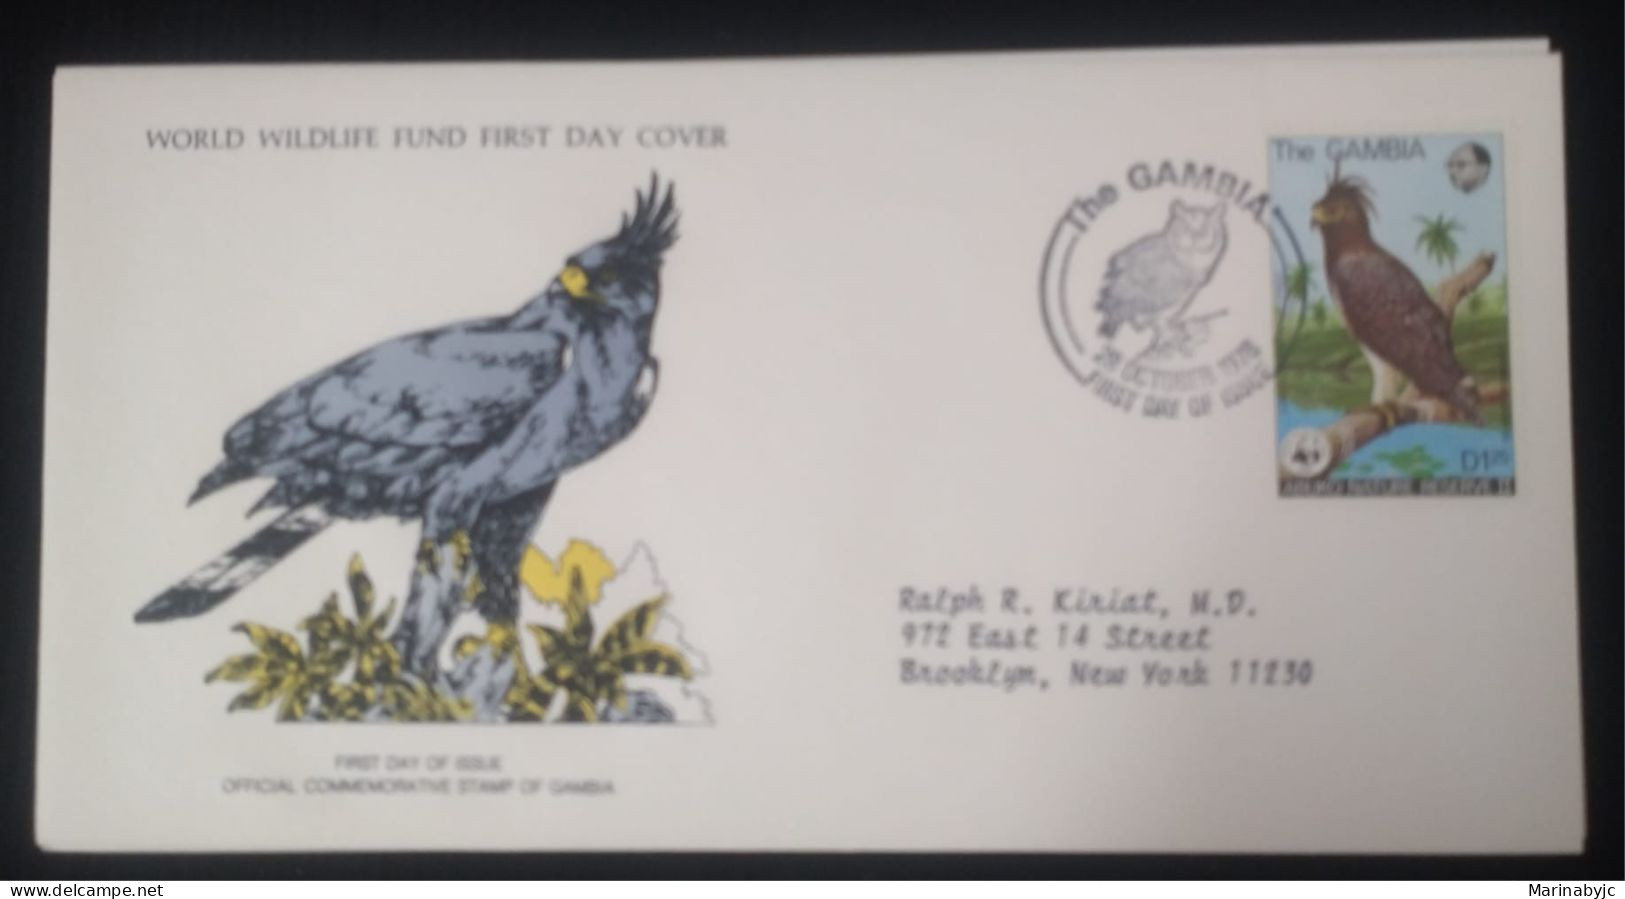 EL)1978 GAMBIA, WORLD WILDLIFE FUND, WWF, ABUKO NATURE RESERVE, LONG-CRESTED EAGLE, CIRCULATED TO NEW YORK - USA, FDC - Gambie (1965-...)